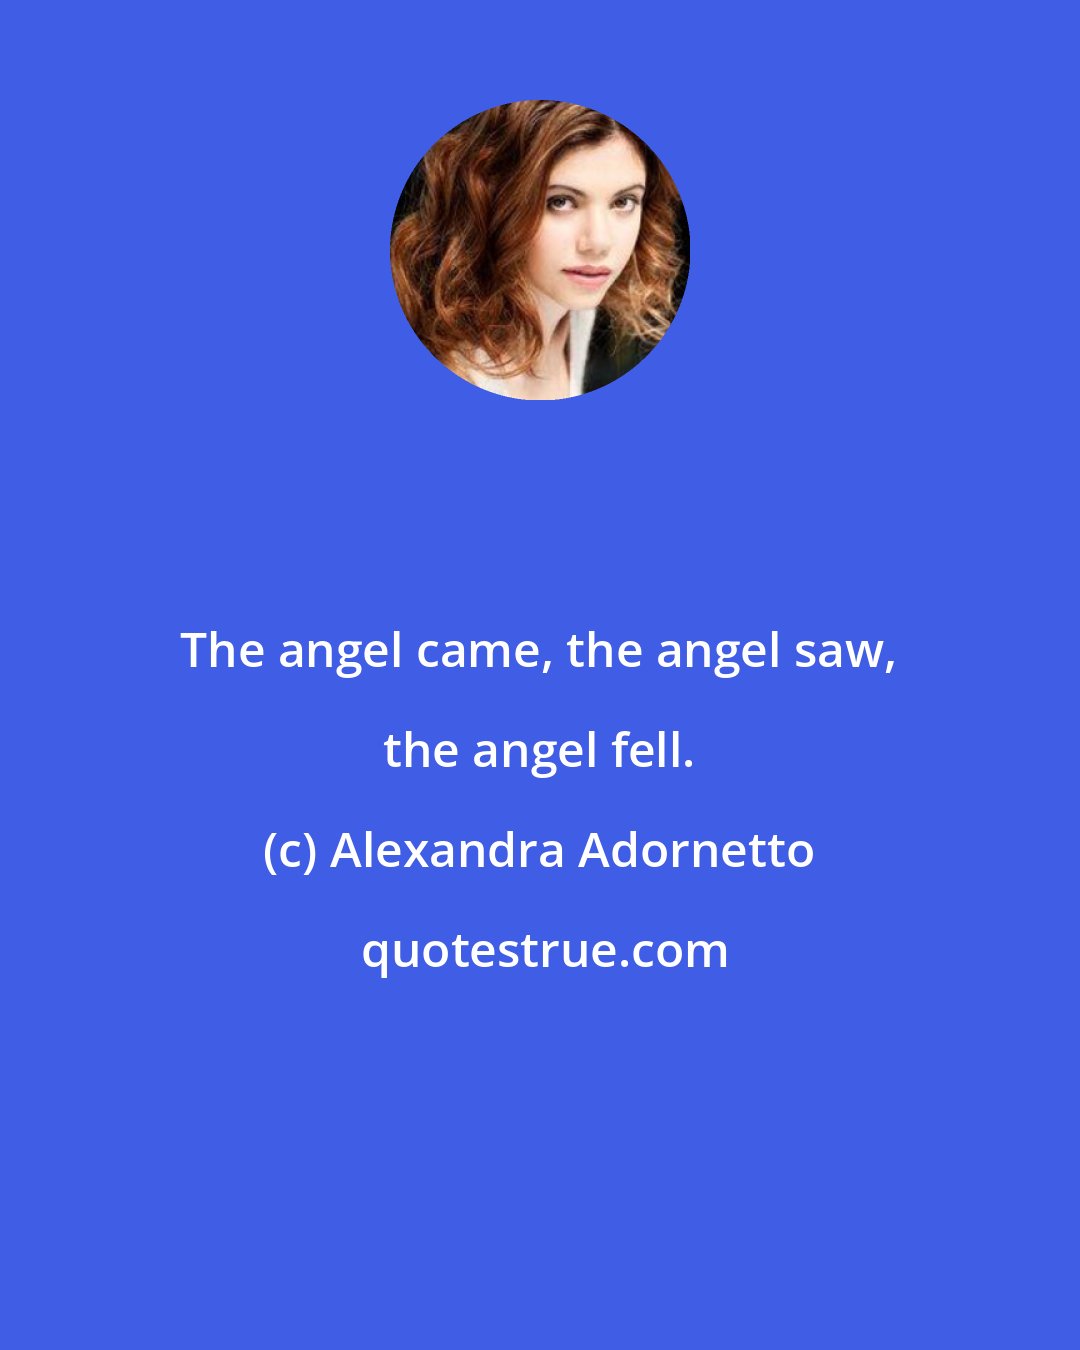 Alexandra Adornetto: The angel came, the angel saw, the angel fell.